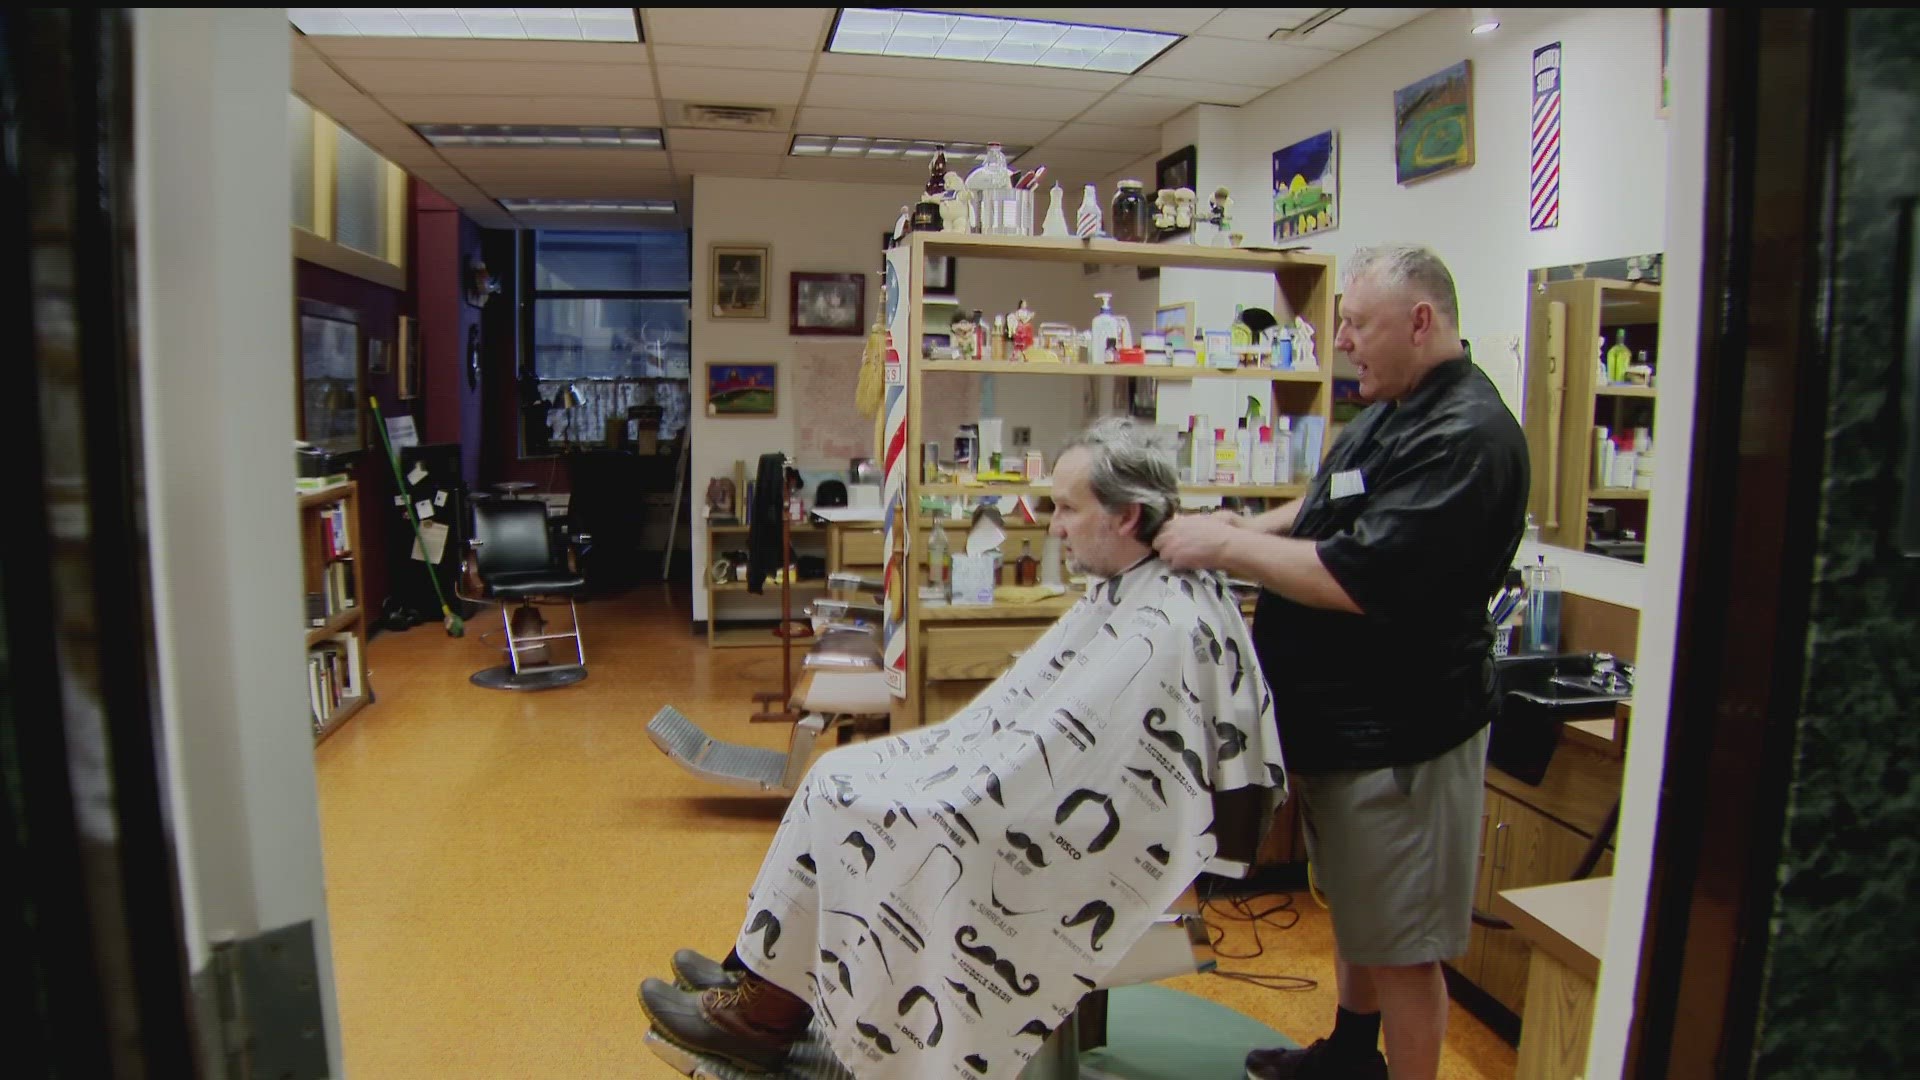 The owner of the Grain Exchange Barber Shop says he's closing on March 31, marking the end of a historic era.